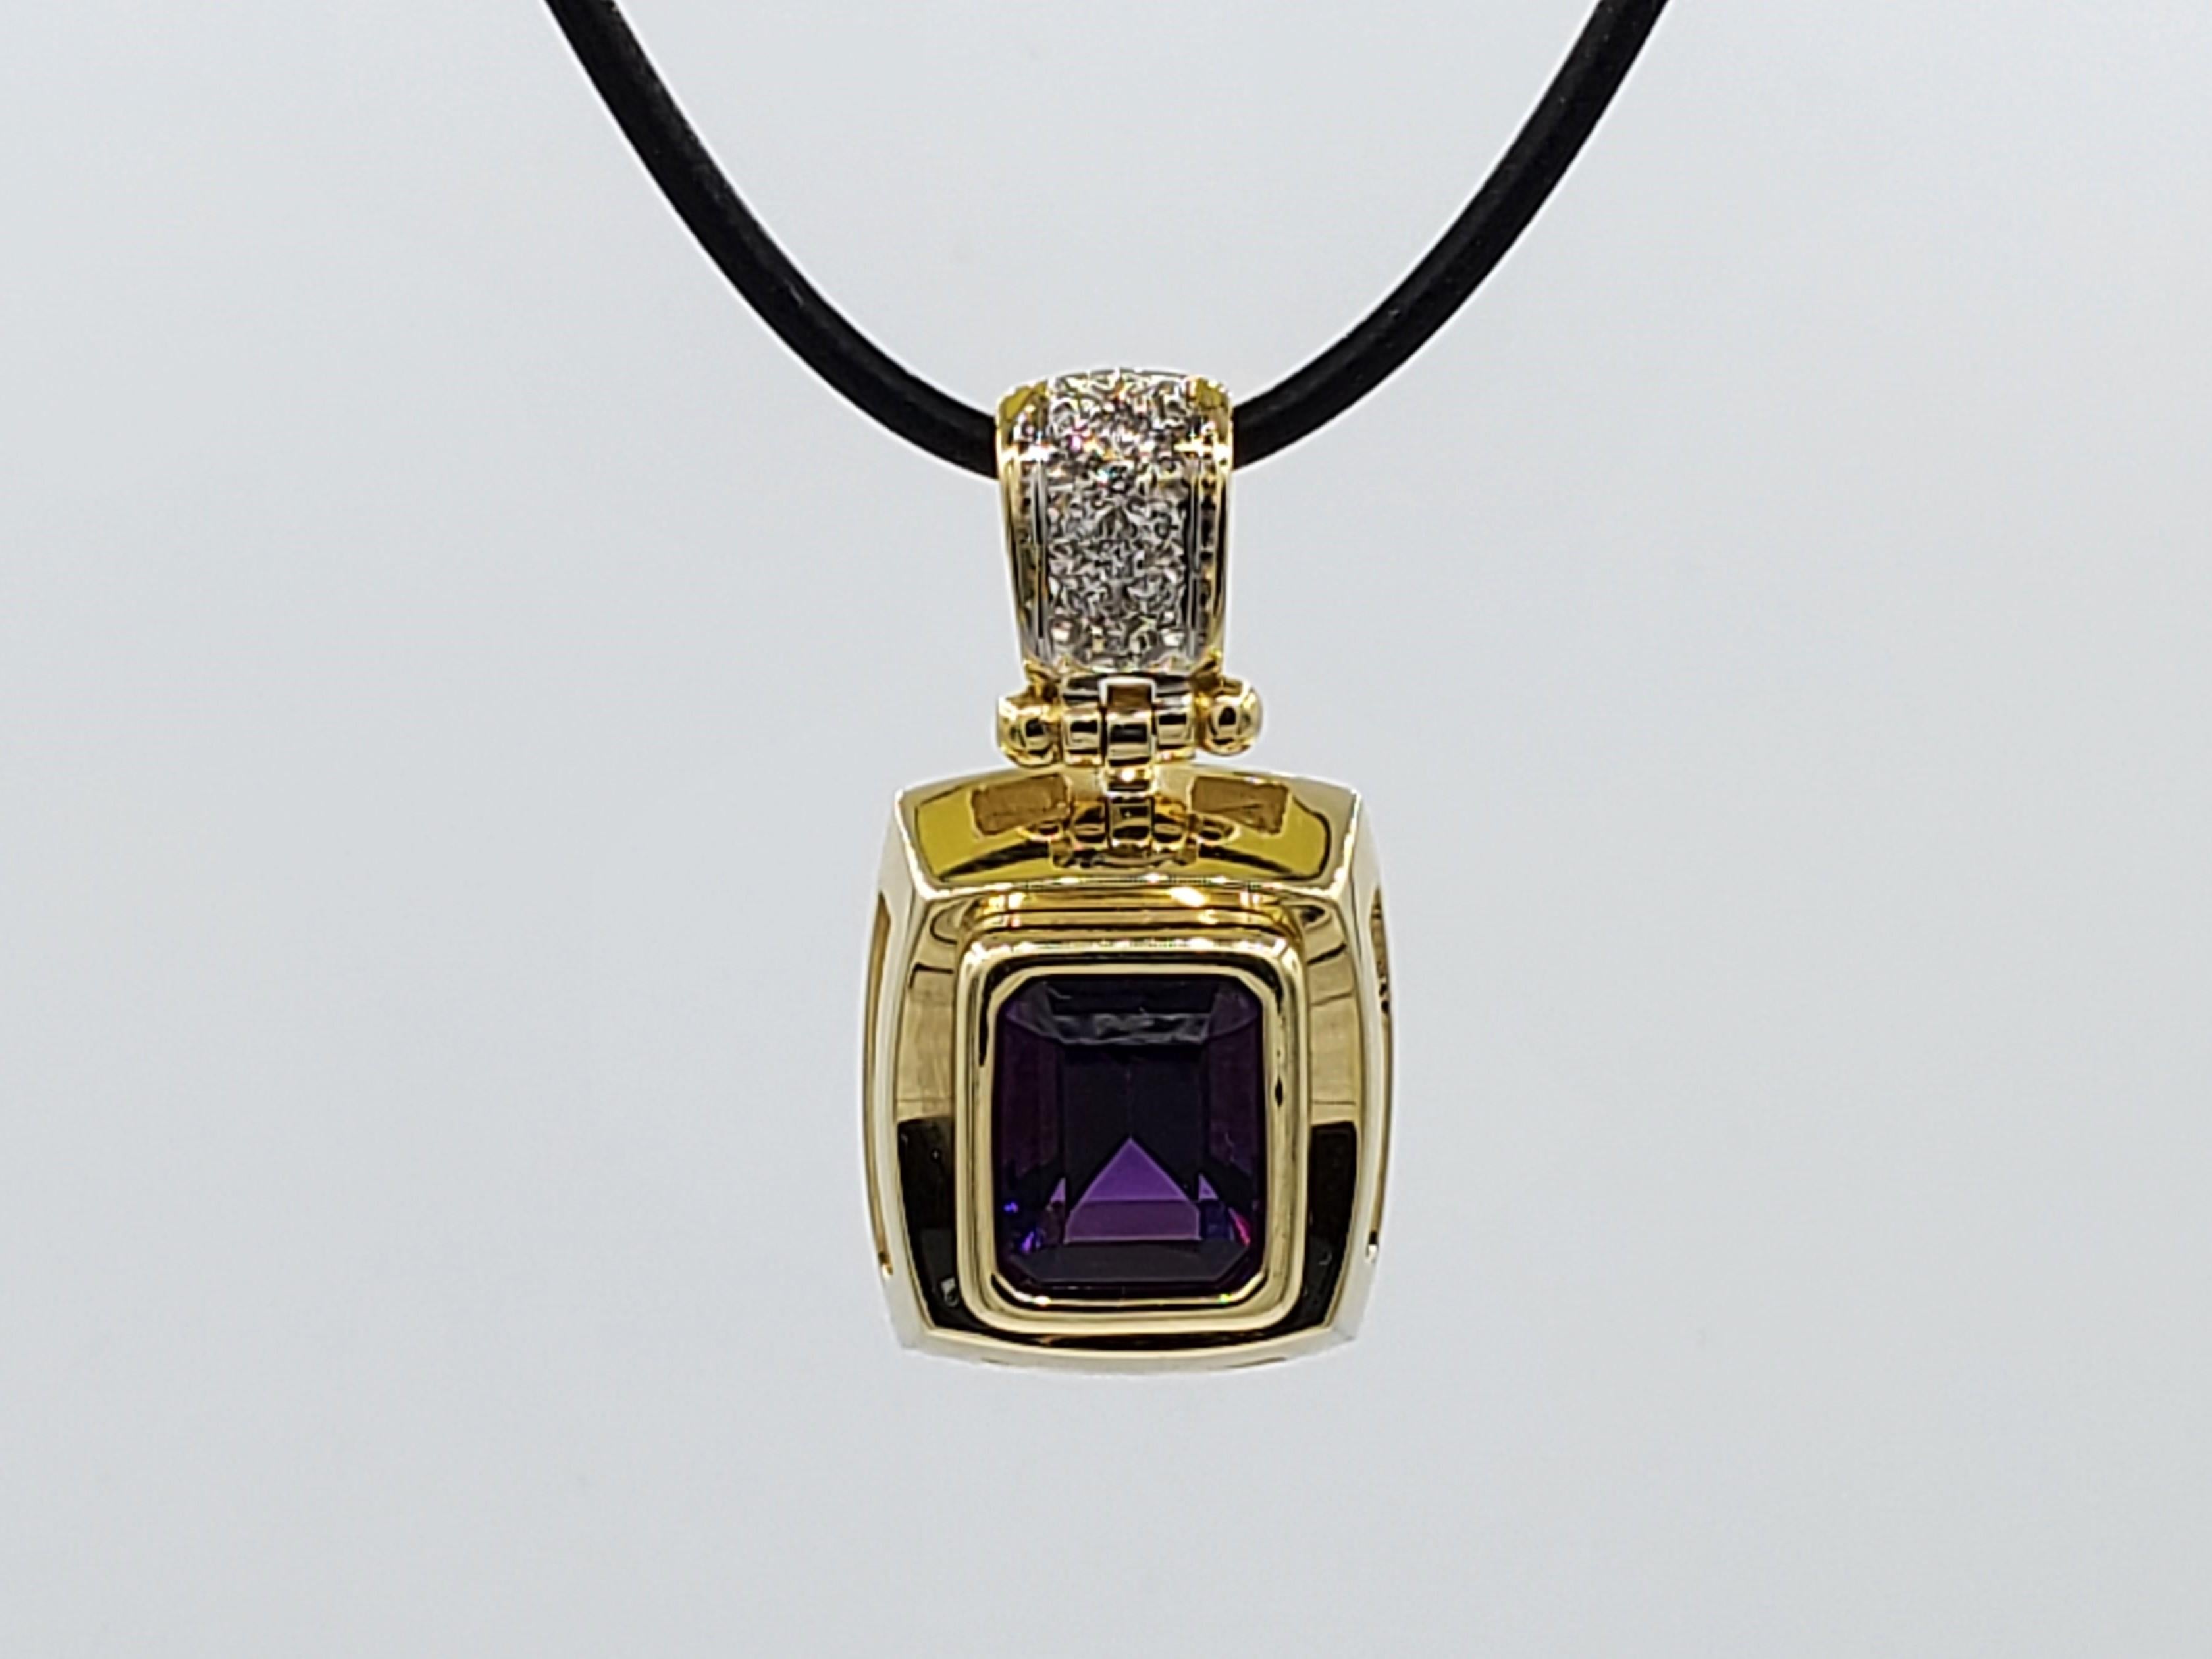 Beautiful 14kt Yellow Gold Amethyst Diamond Pendant, Like New Condition, Vibrant Purple Amethyst, 10 diamonds, 22mm x 18 mm (not including bail), The bail is 14mm x 8mm by February birthstone. This is beautiful pendant and perfect for any occasion.